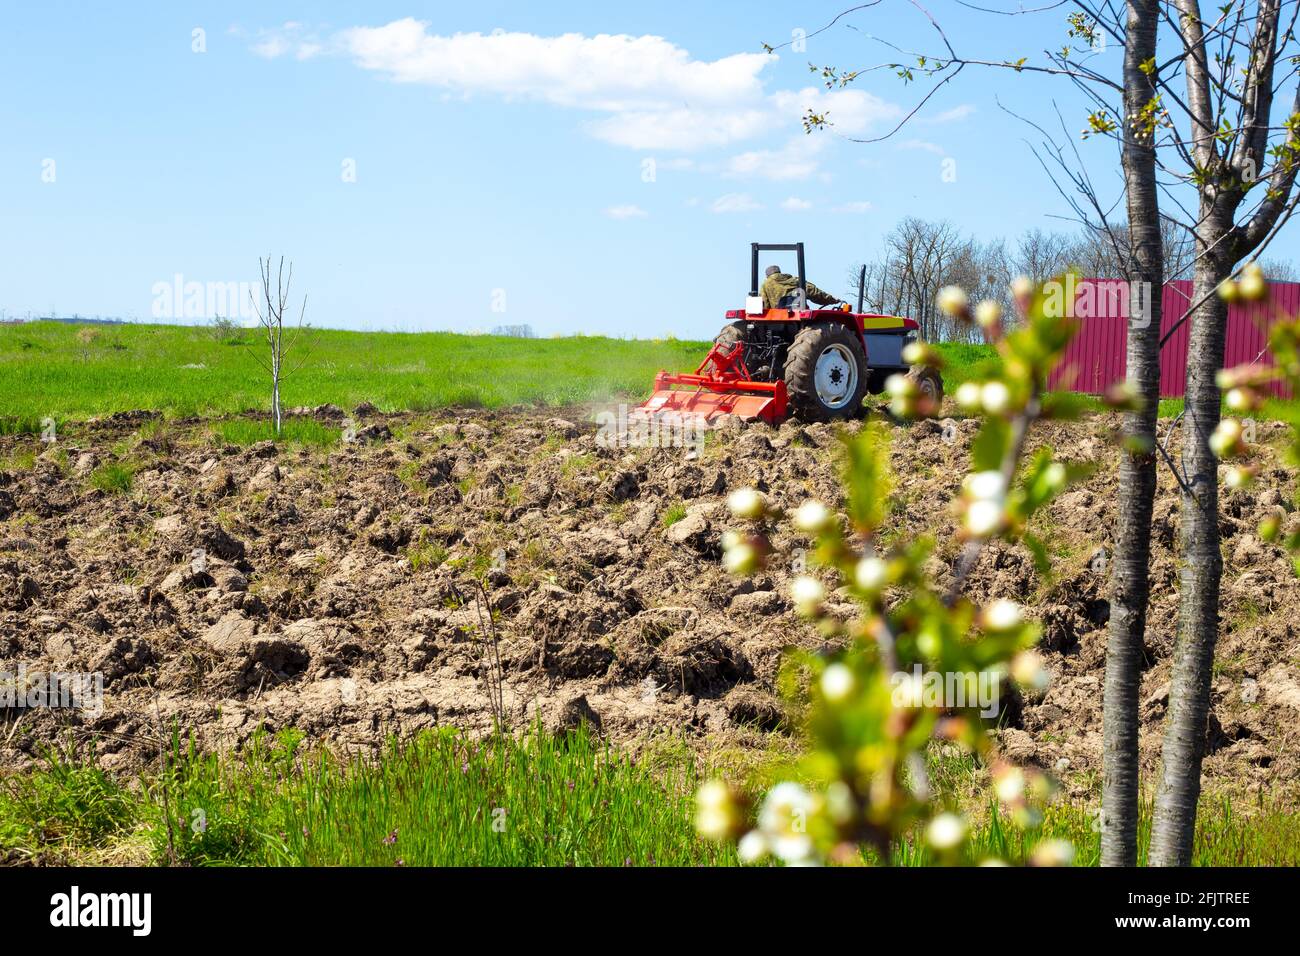 A small tractor plows the soil with a milling plow in a country vegetable garden in early spring. Preparing the soil for planting crops. Stock Photo